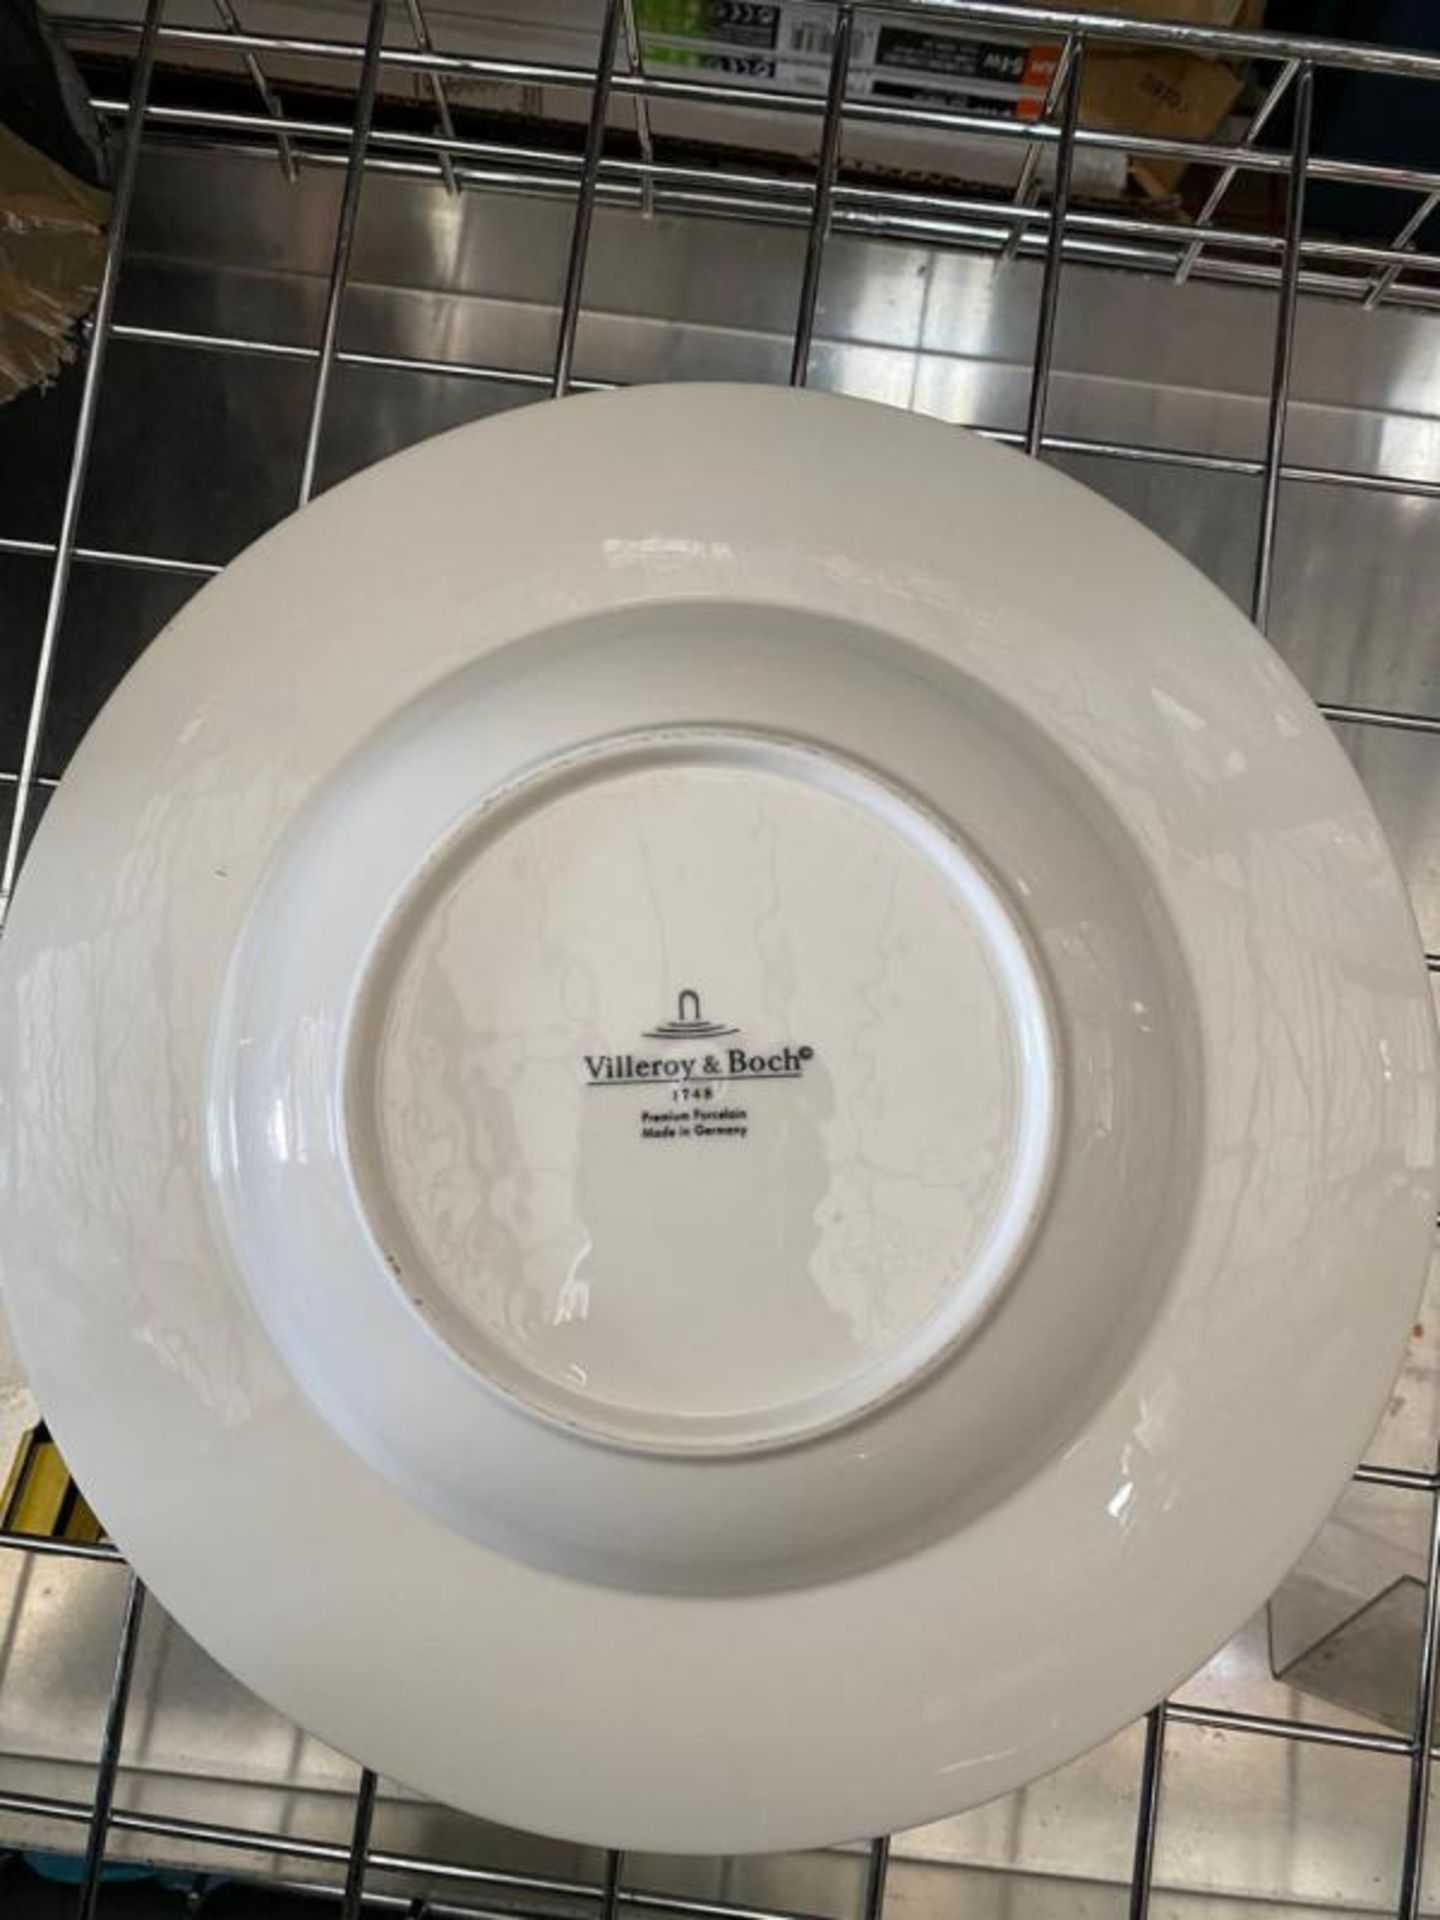 10 x Villeroy & Boch Royal Dinner Plate -290mm (29cm) - Ref: 1044122620 - New and unused withou - Image 2 of 5